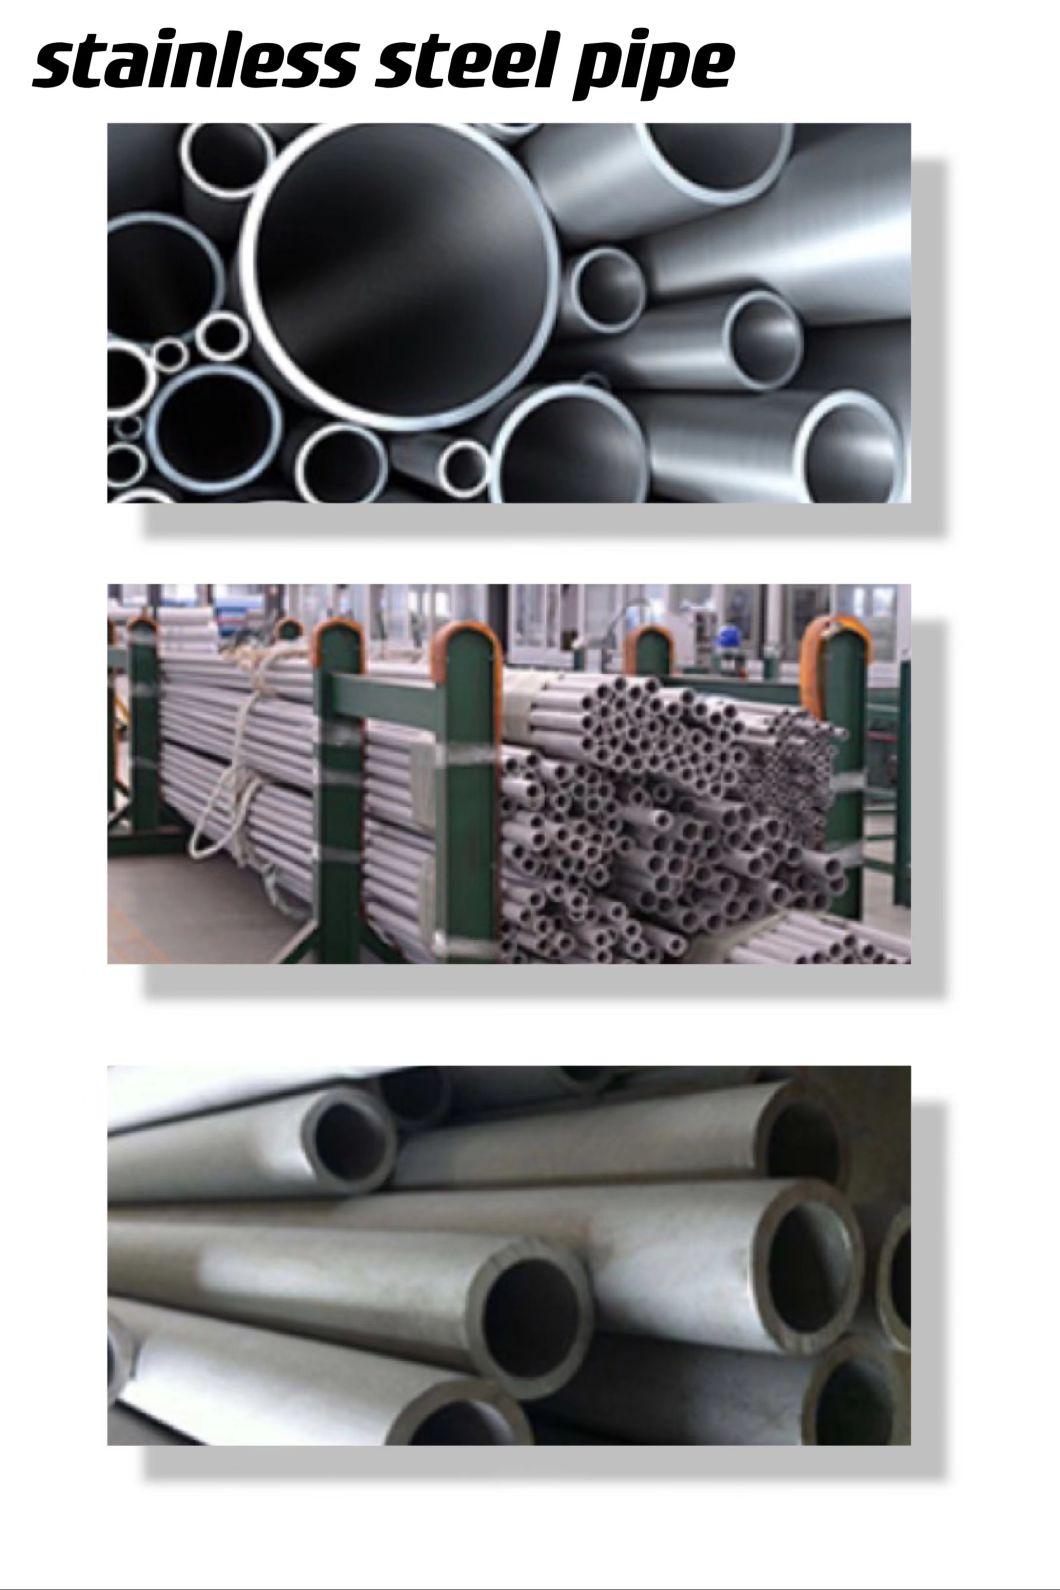 About Basic Stainless Steel Pipe